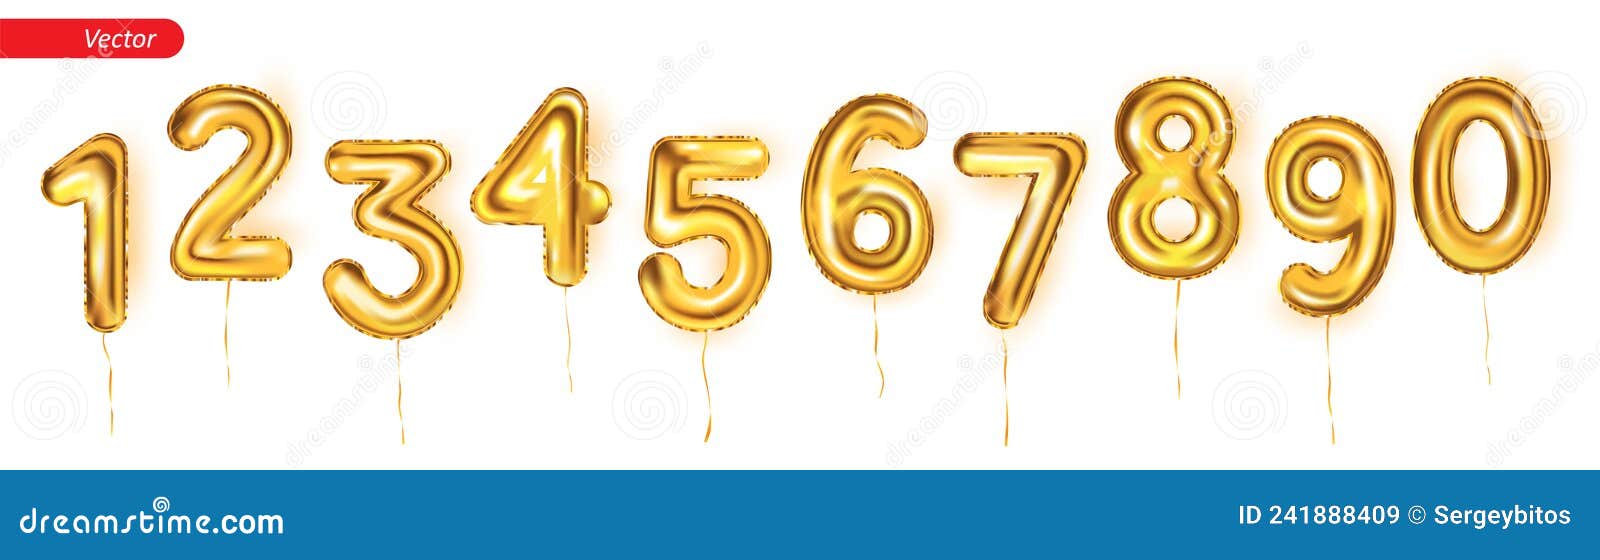 golden balloons in the form of numbers from 0 to 9